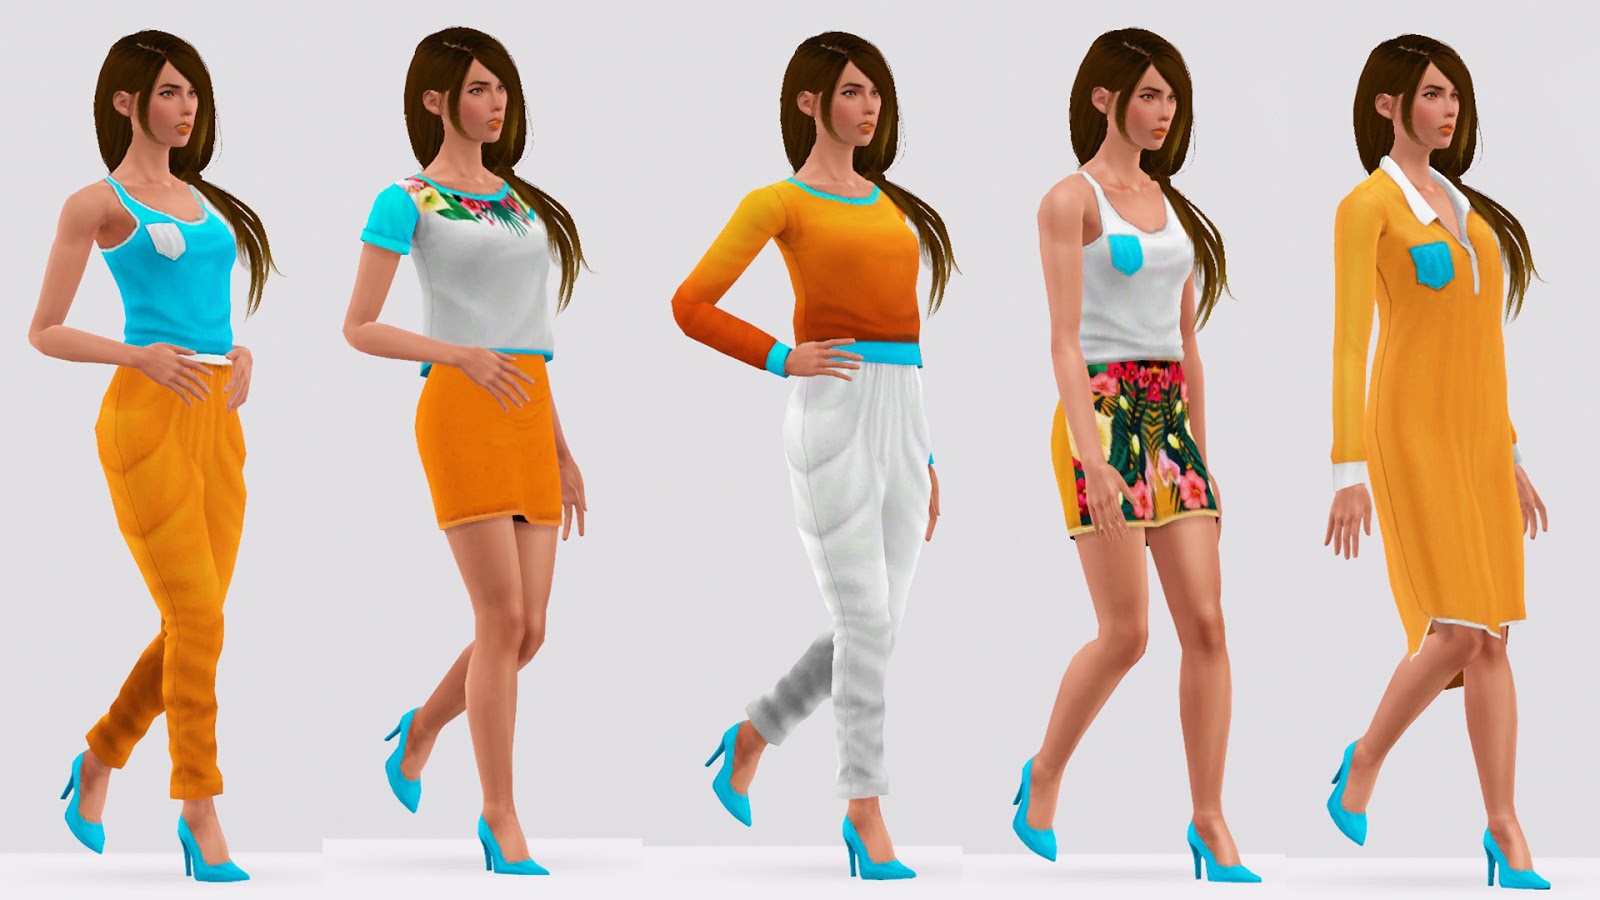 Afterdusk Sims Female Model Pose Set Two